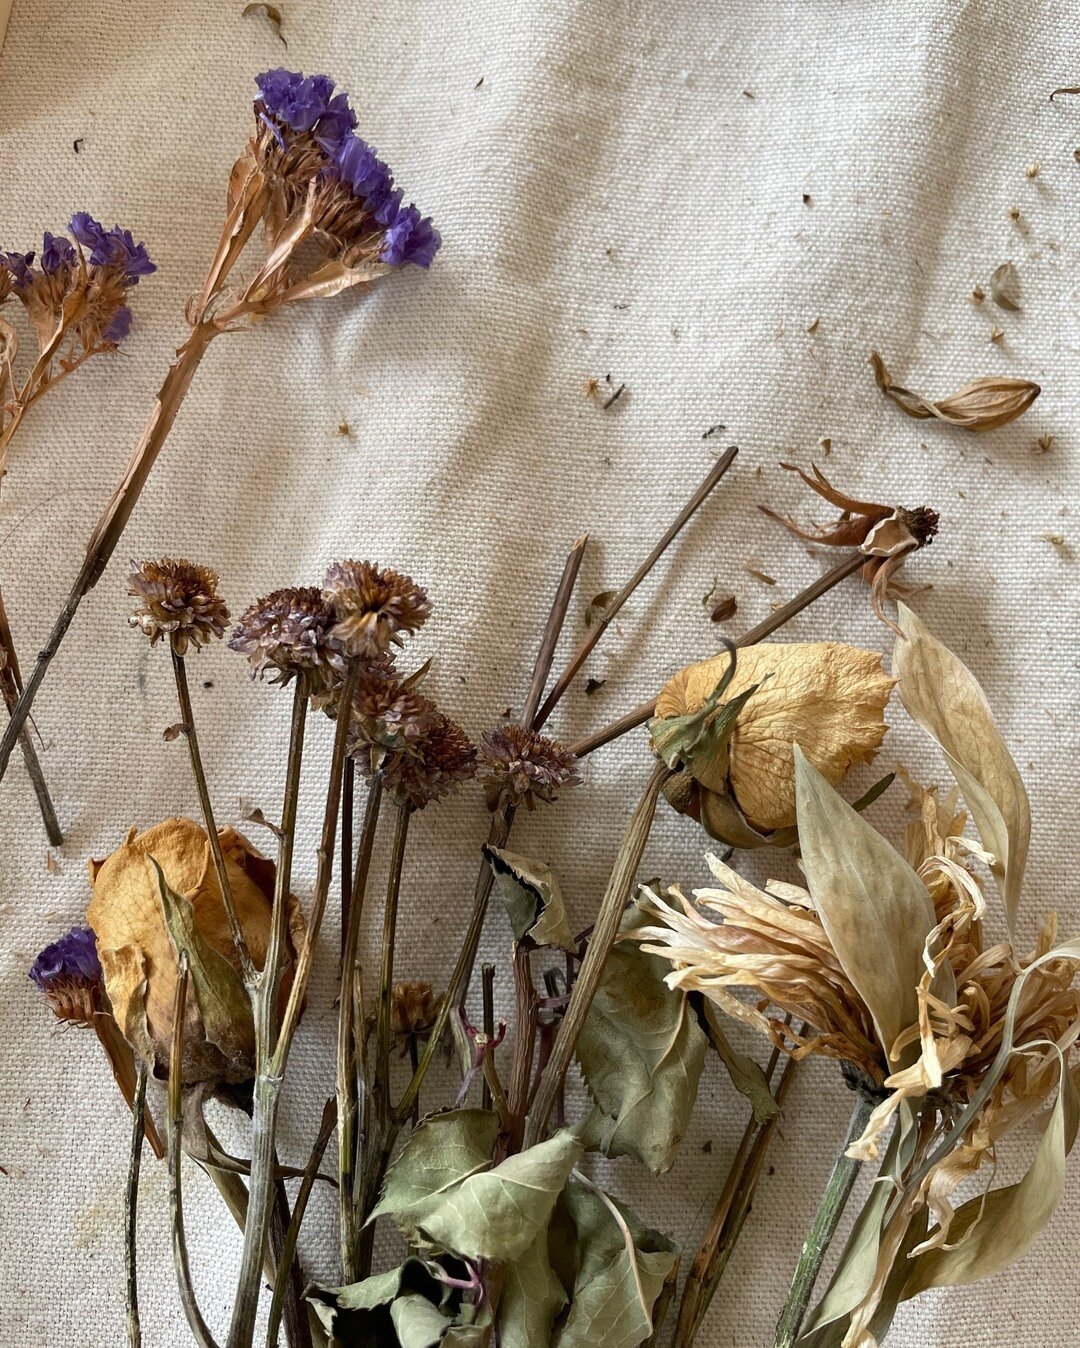 A little bit of this &amp; a little bit of that. | Playing with dried flowers and loving every second if it. ⠀⠀⠀⠀⠀⠀⠀⠀⠀
.⠀⠀⠀⠀⠀⠀⠀⠀⠀
.⠀⠀⠀⠀⠀⠀⠀⠀⠀
.⠀⠀⠀⠀⠀⠀⠀⠀⠀
.⠀⠀⠀⠀⠀⠀⠀⠀⠀
.⠀⠀⠀⠀⠀⠀⠀⠀⠀
.⠀⠀⠀⠀⠀⠀⠀⠀⠀
.⠀⠀⠀⠀⠀⠀⠀⠀⠀
.⠀⠀⠀⠀⠀⠀⠀⠀⠀
#artist #flower #flowers #driedart #flowera